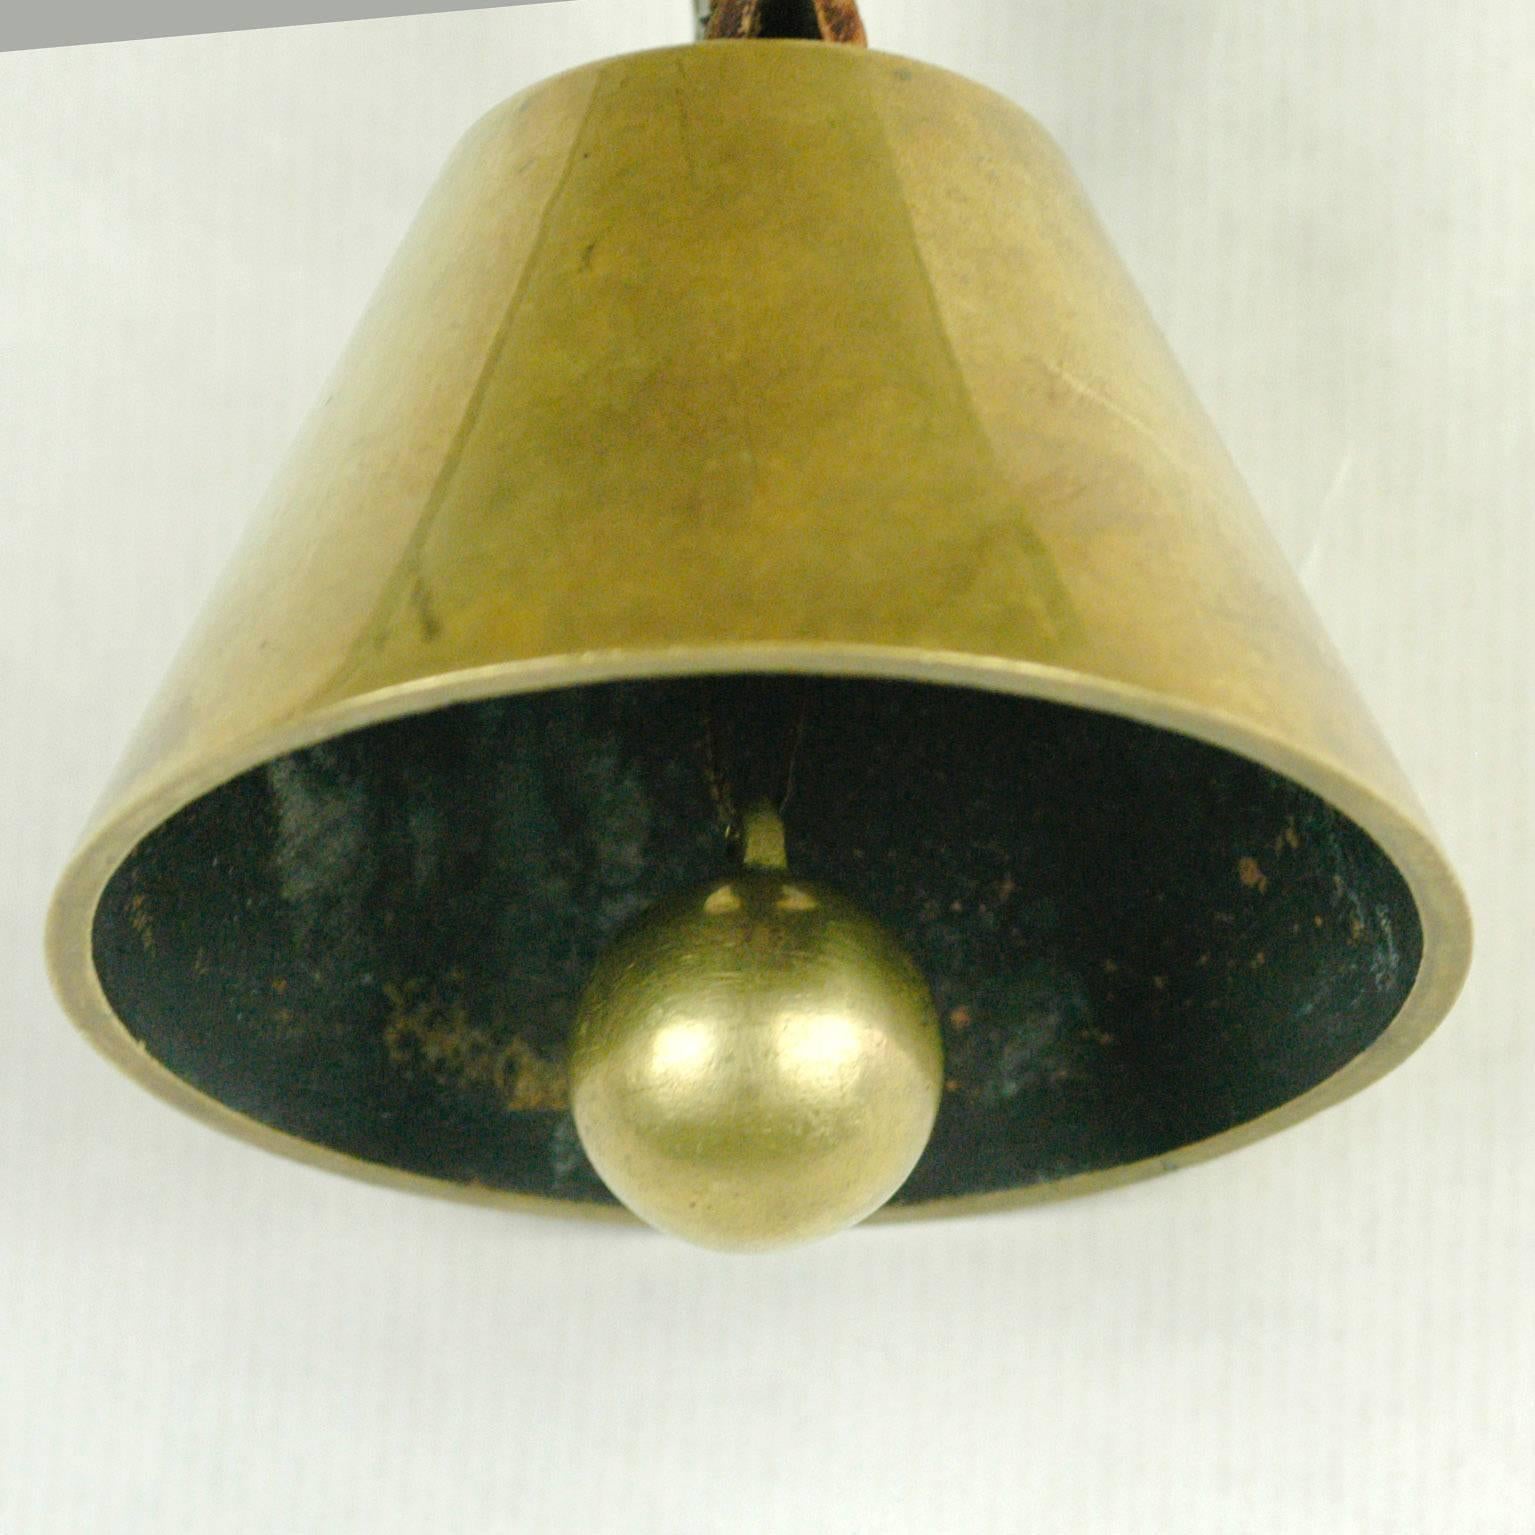 Austrian Midcentury Brass and Leather Table Bell by Carl Auböck For Sale 2